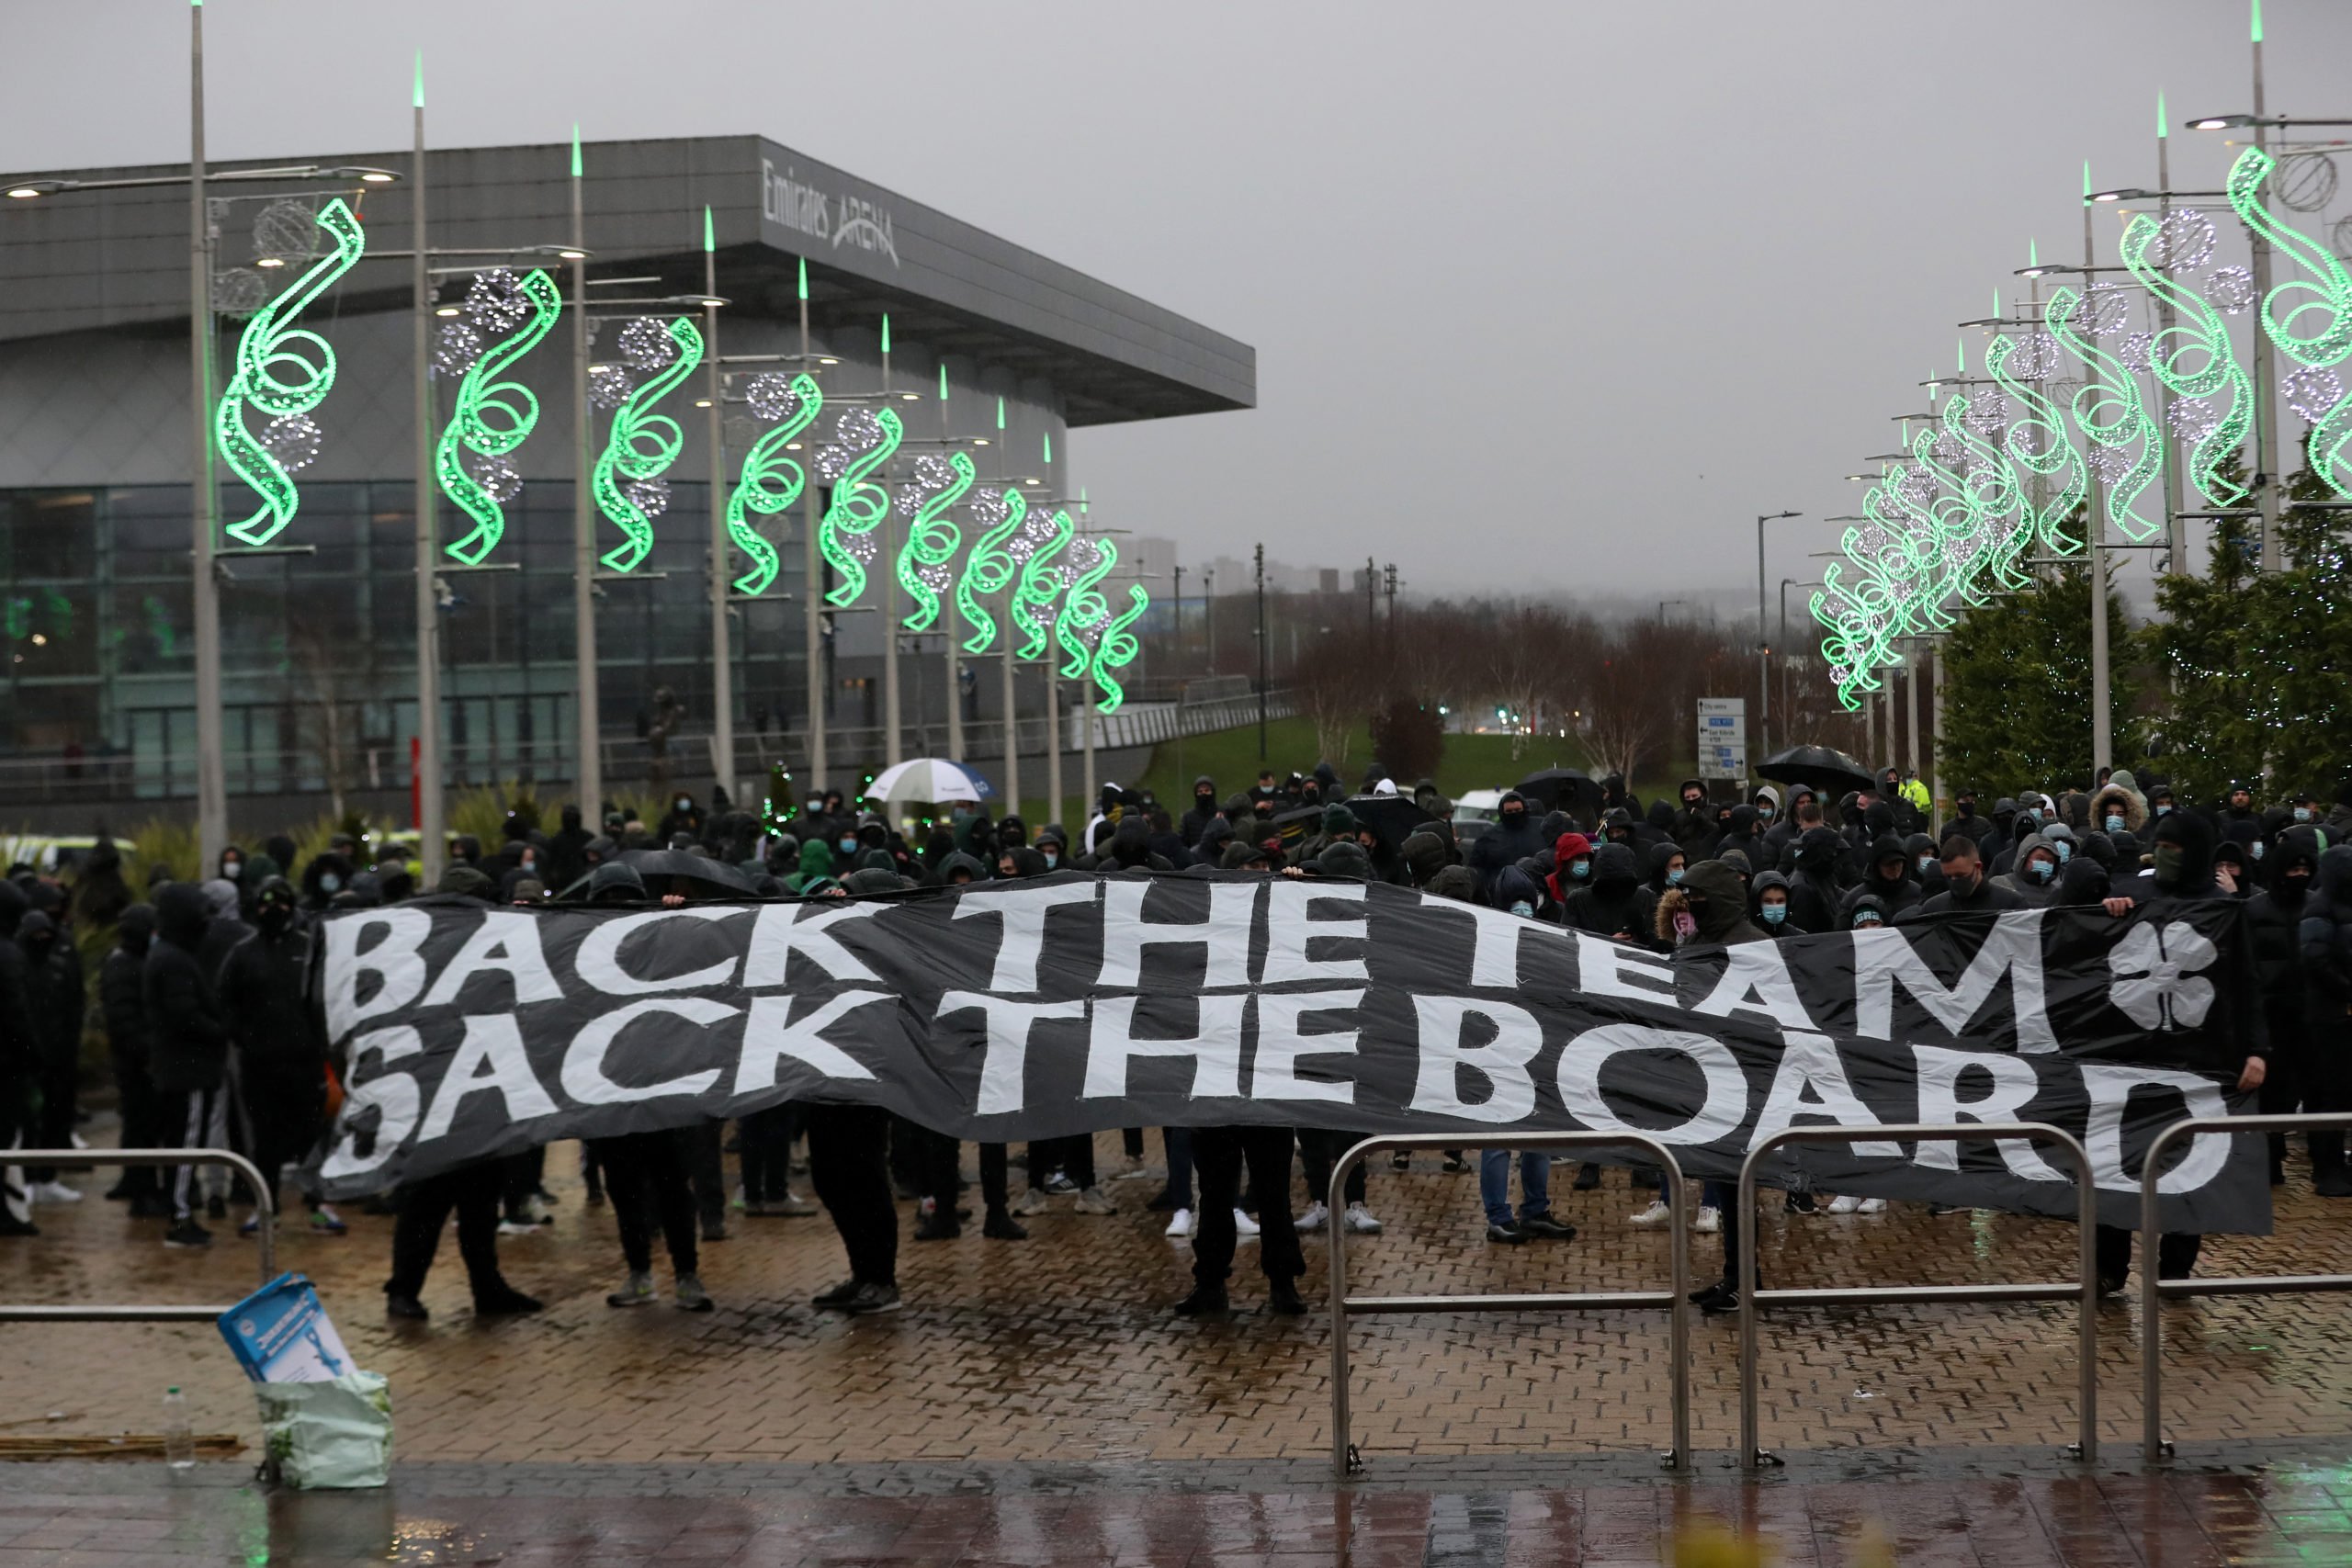 With protest on the horizon, Celtic CEO Dom McKay faces first real test